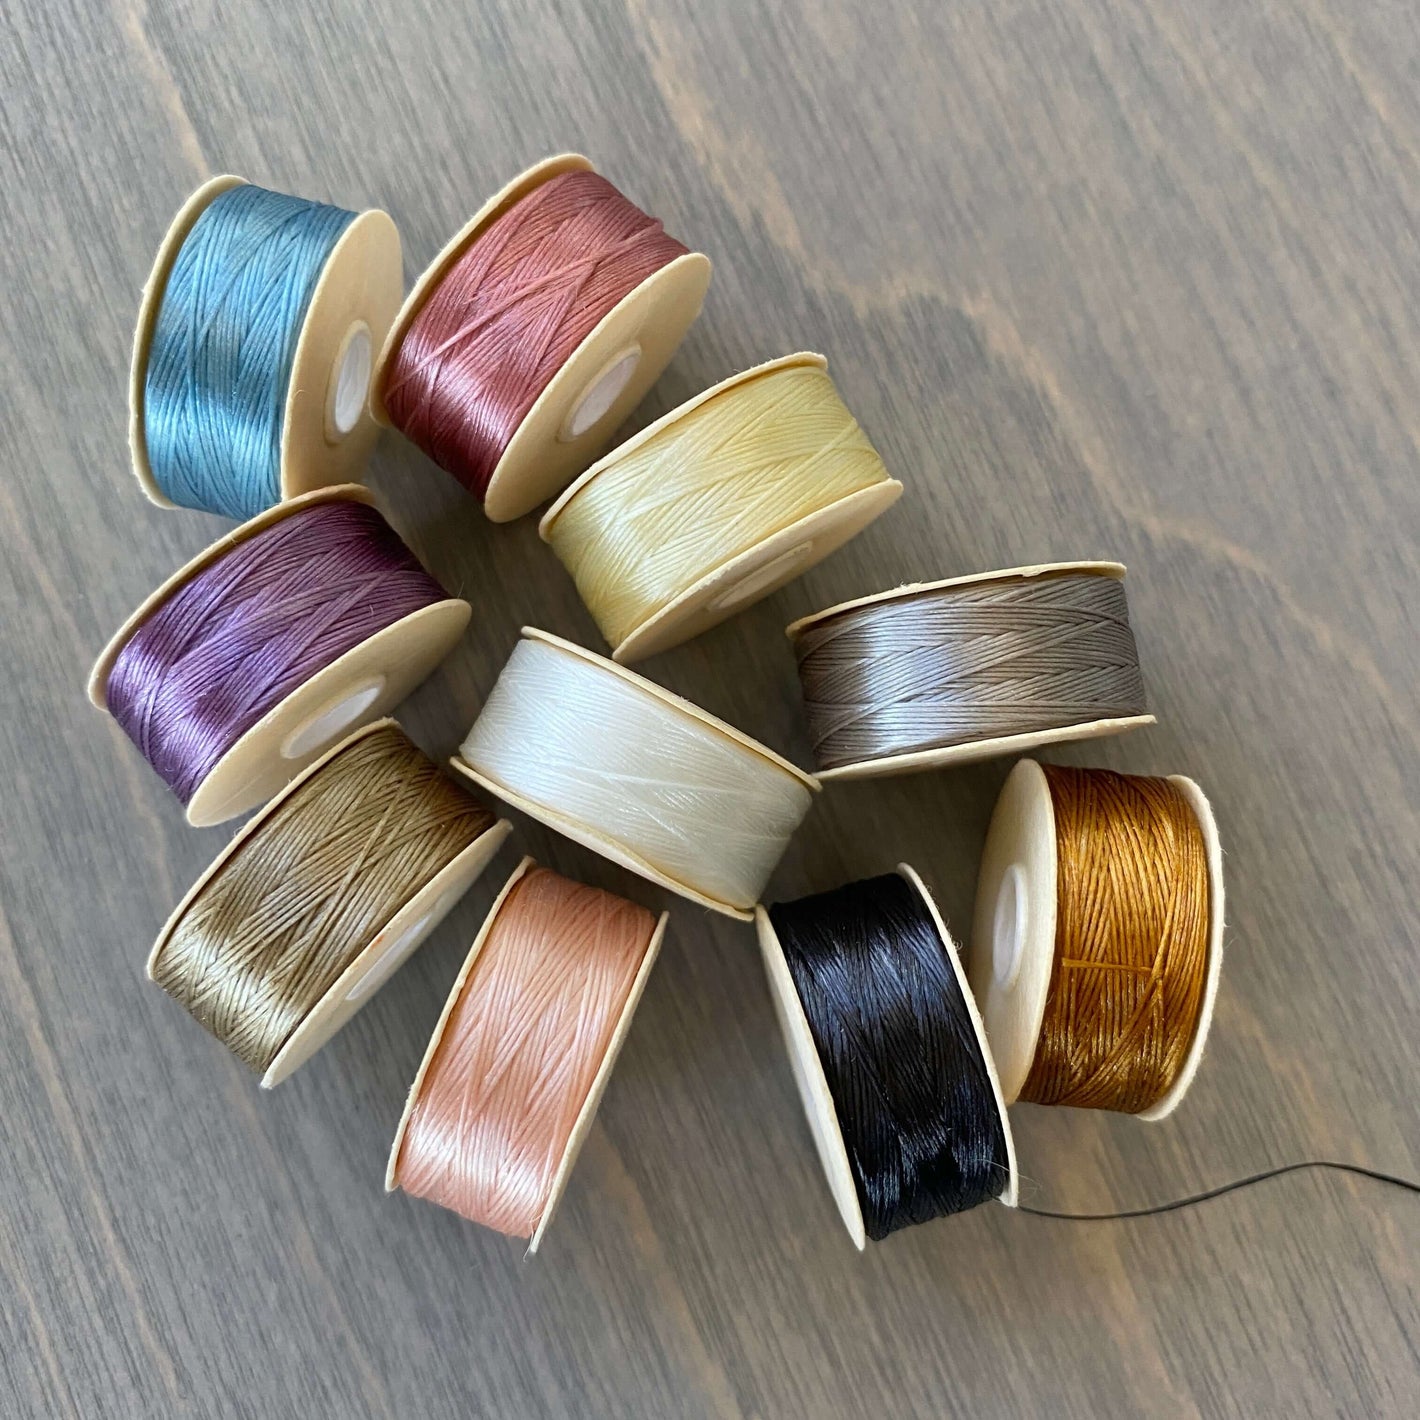 bobbins of Nymo beading thread in various colors